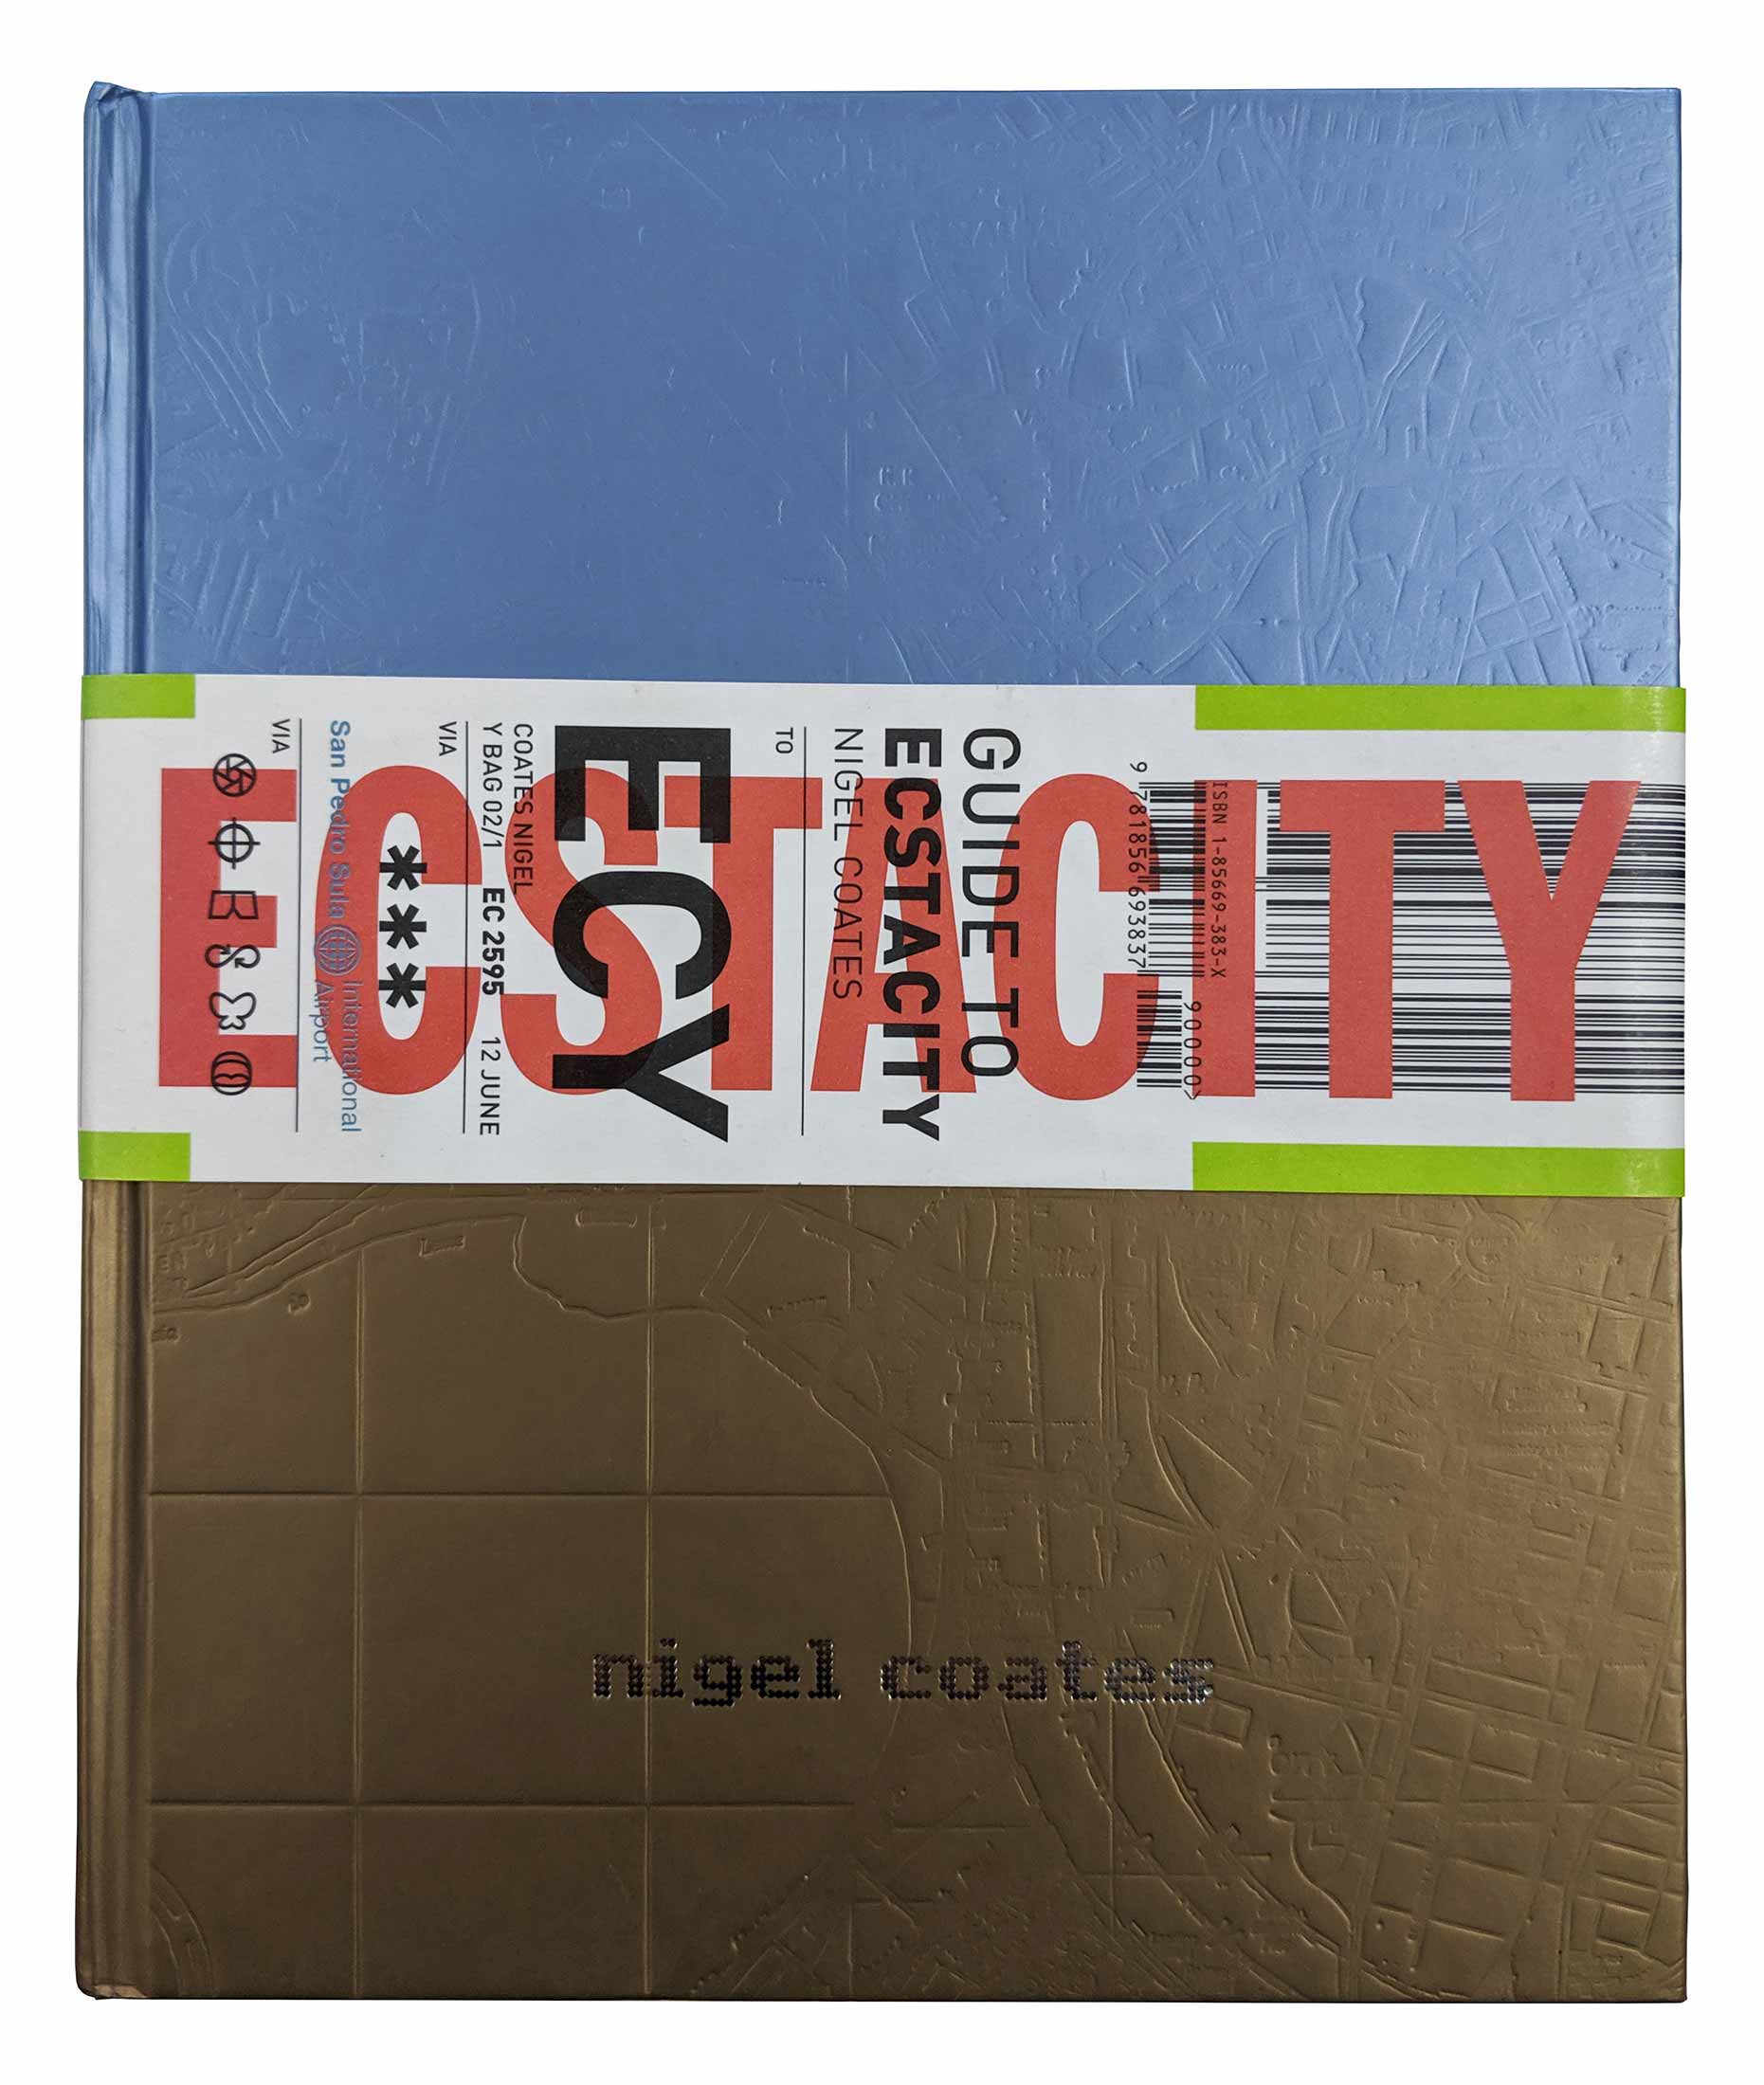 Guide to Ecstacity by Nigel Coates